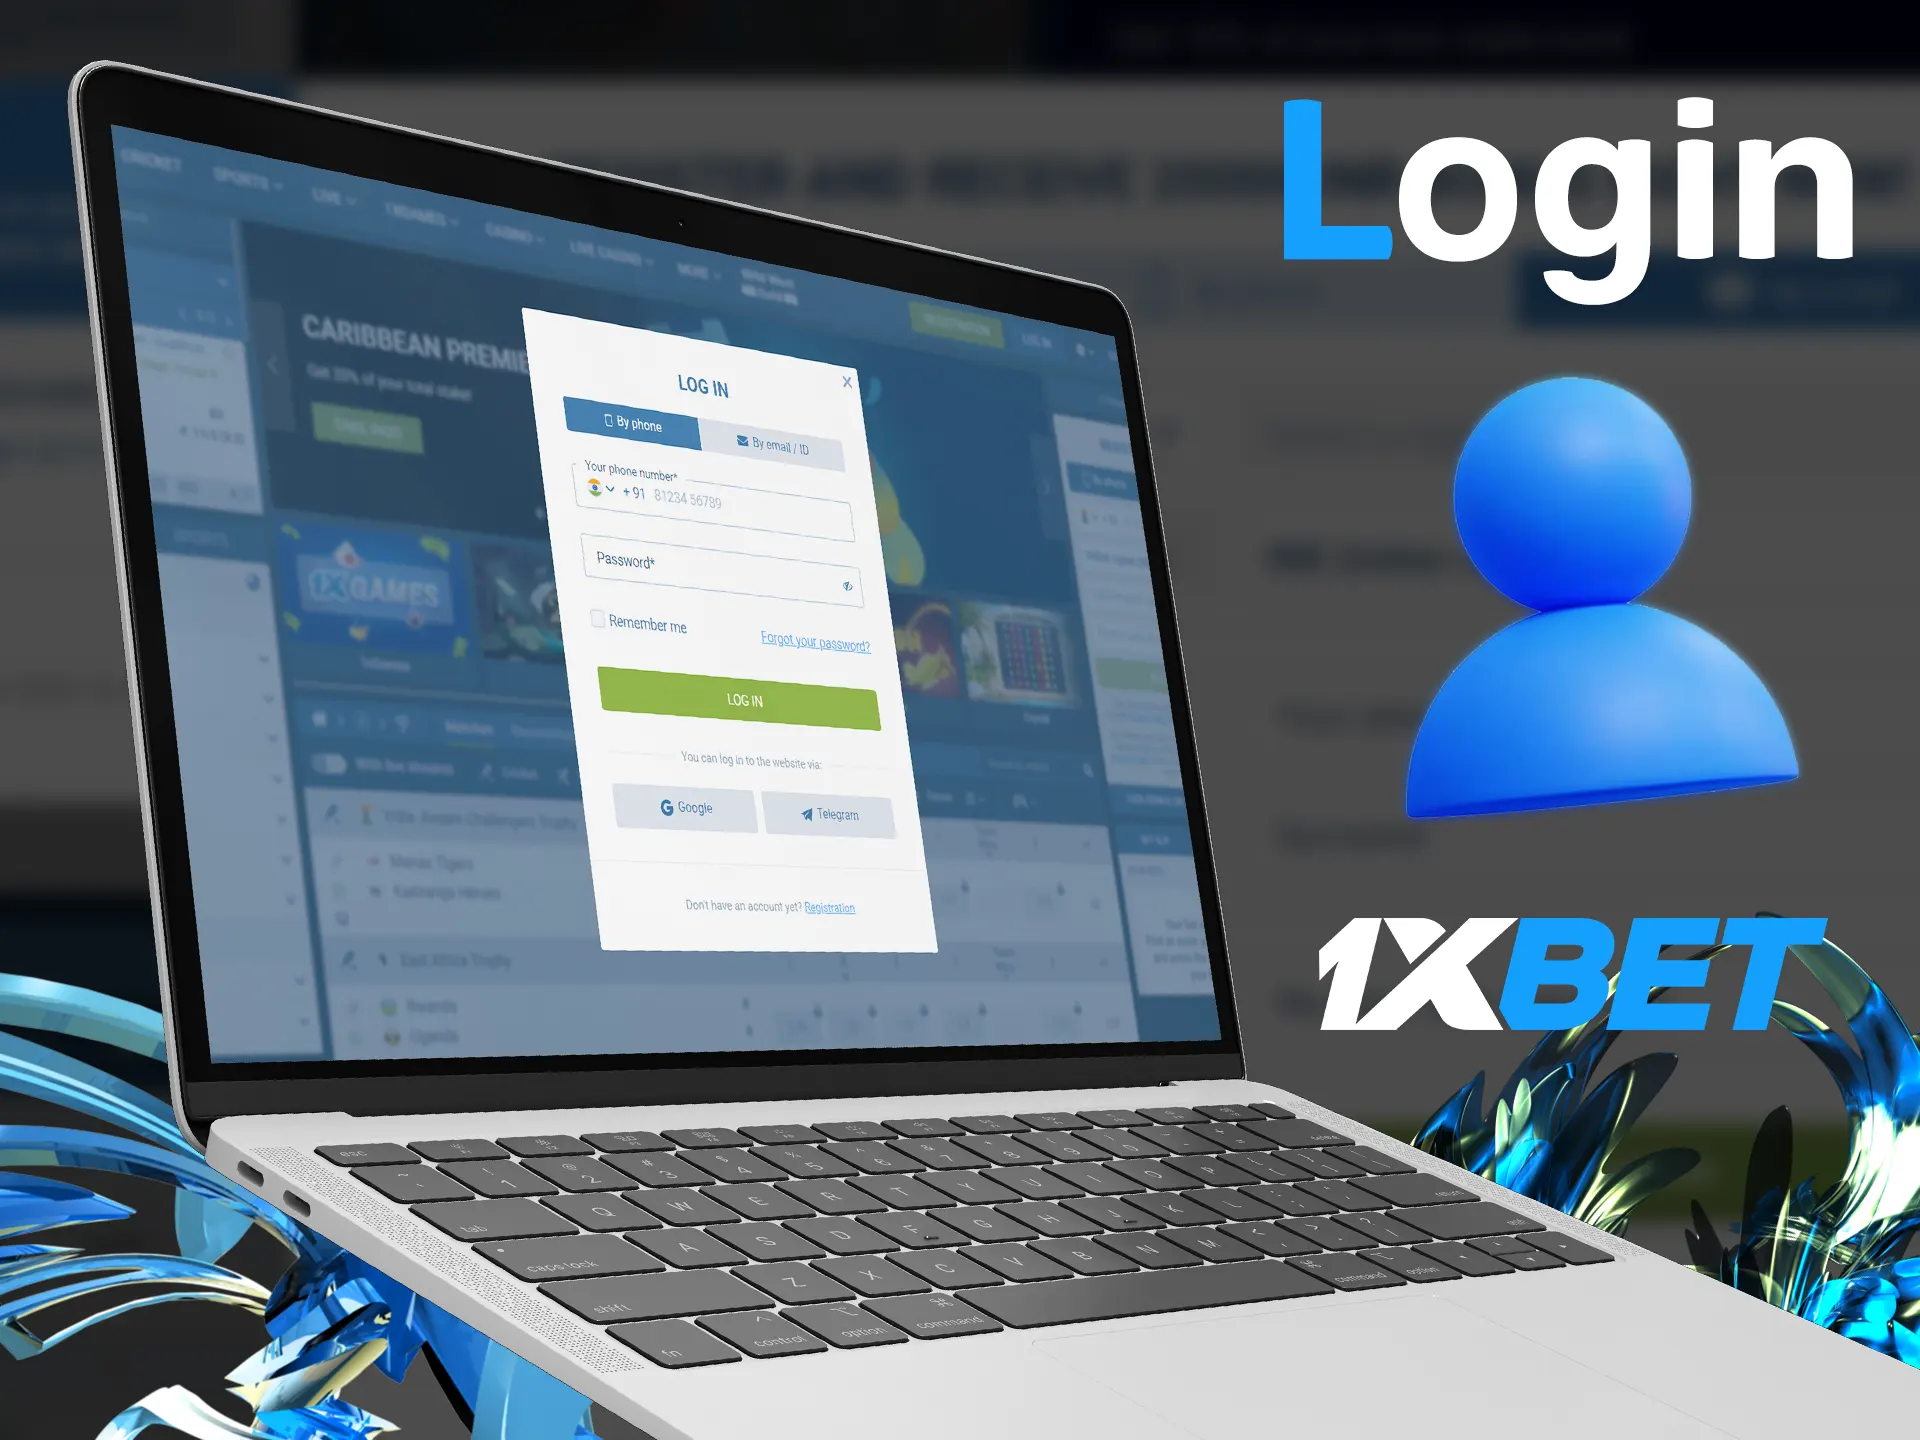 Log in on the 1xbet website using your account.